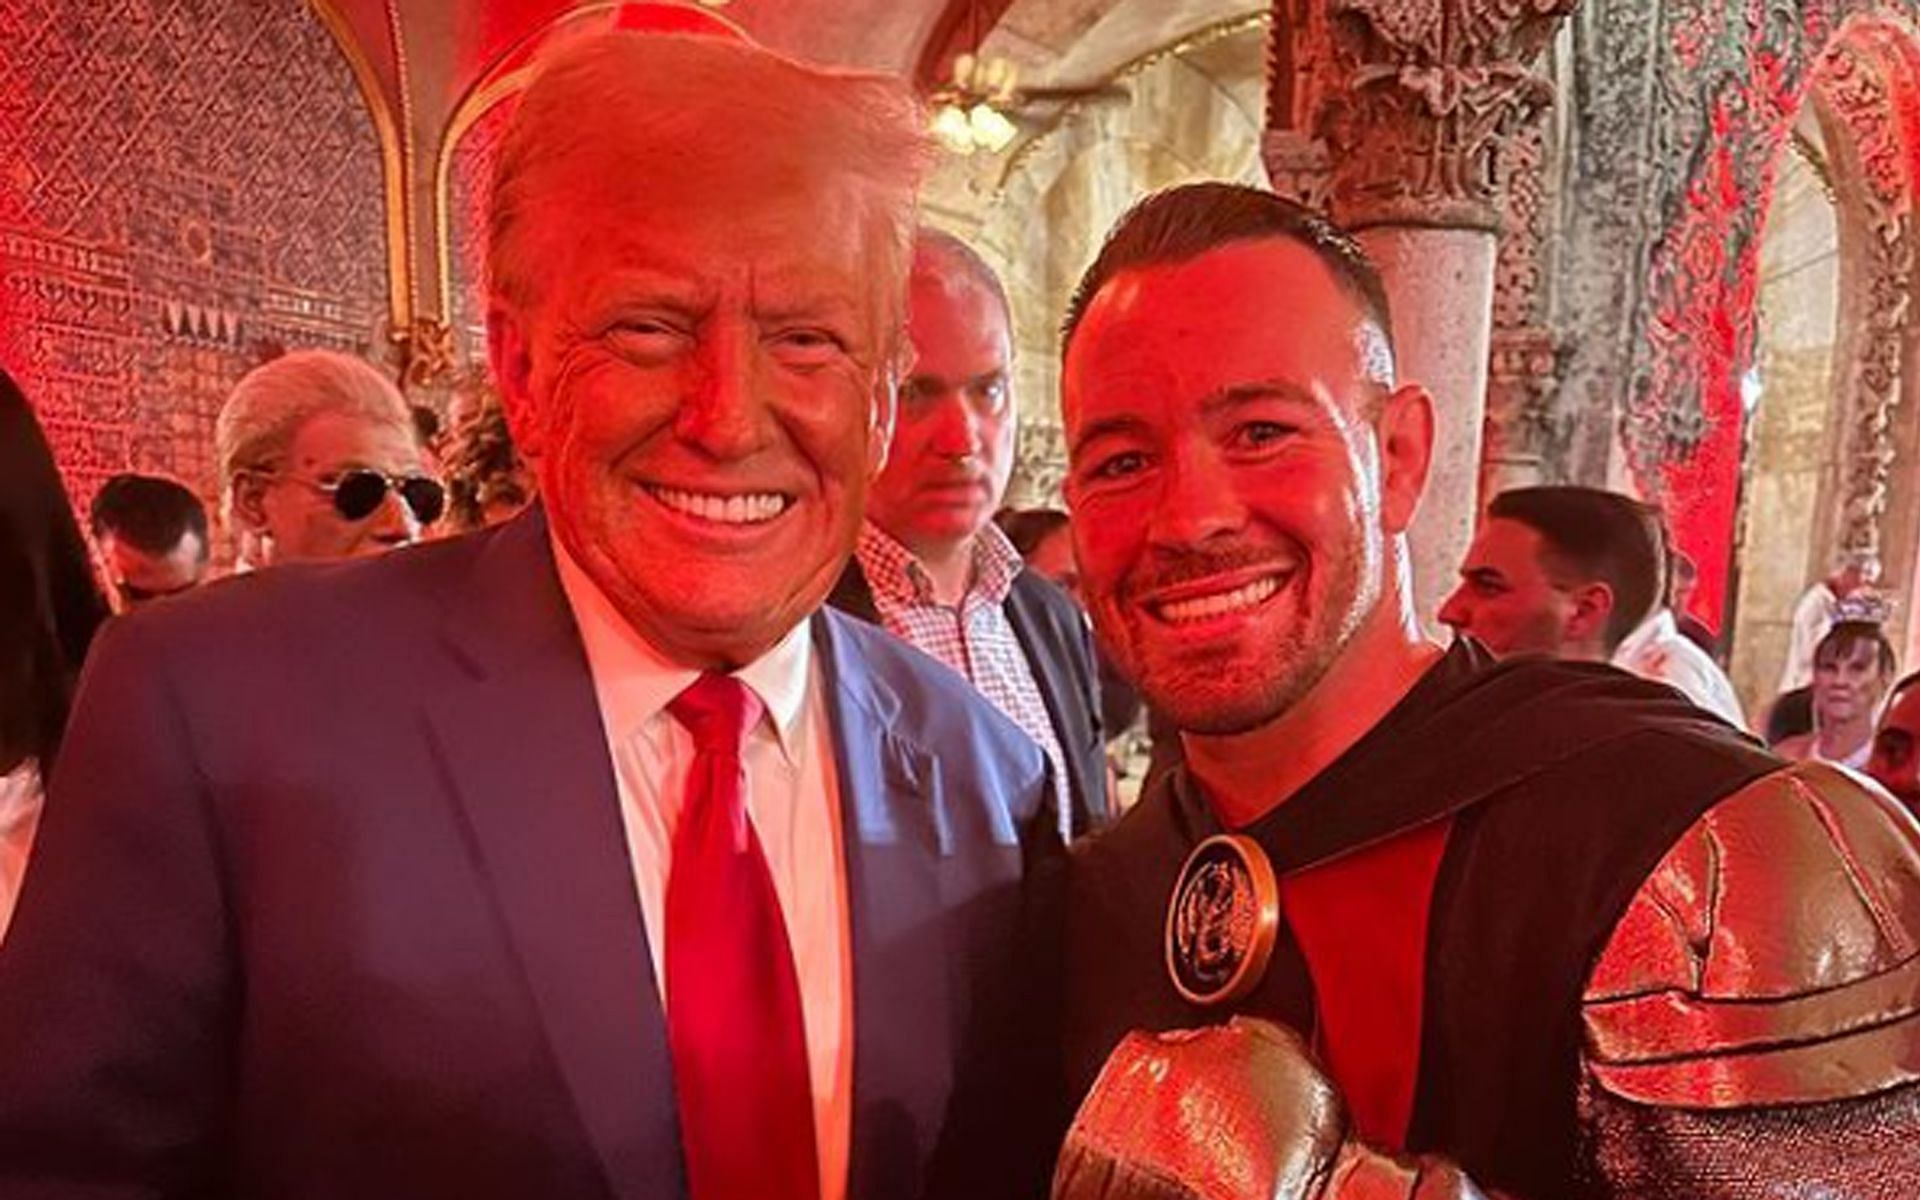 Colby Covington (right) with former US president Donald Trump (left) (Image Courtesy: @colbycovmma Instagram)